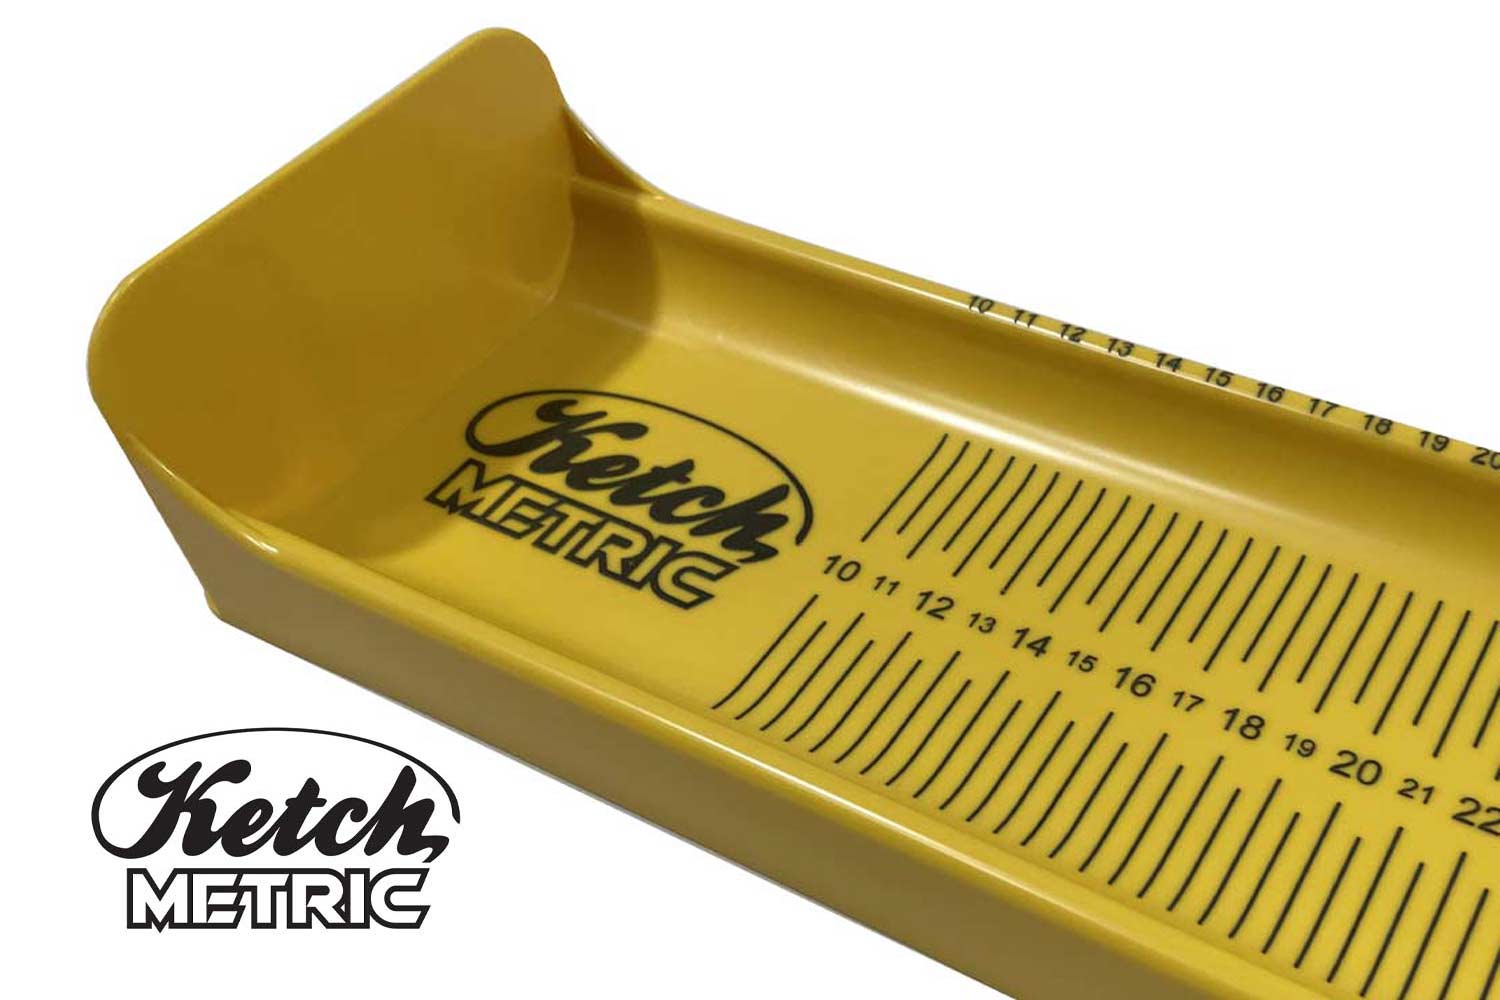 Ketch Products – Ketch Products is a premium outdoor products manufacturer  that specializes in fishing products and accessories.